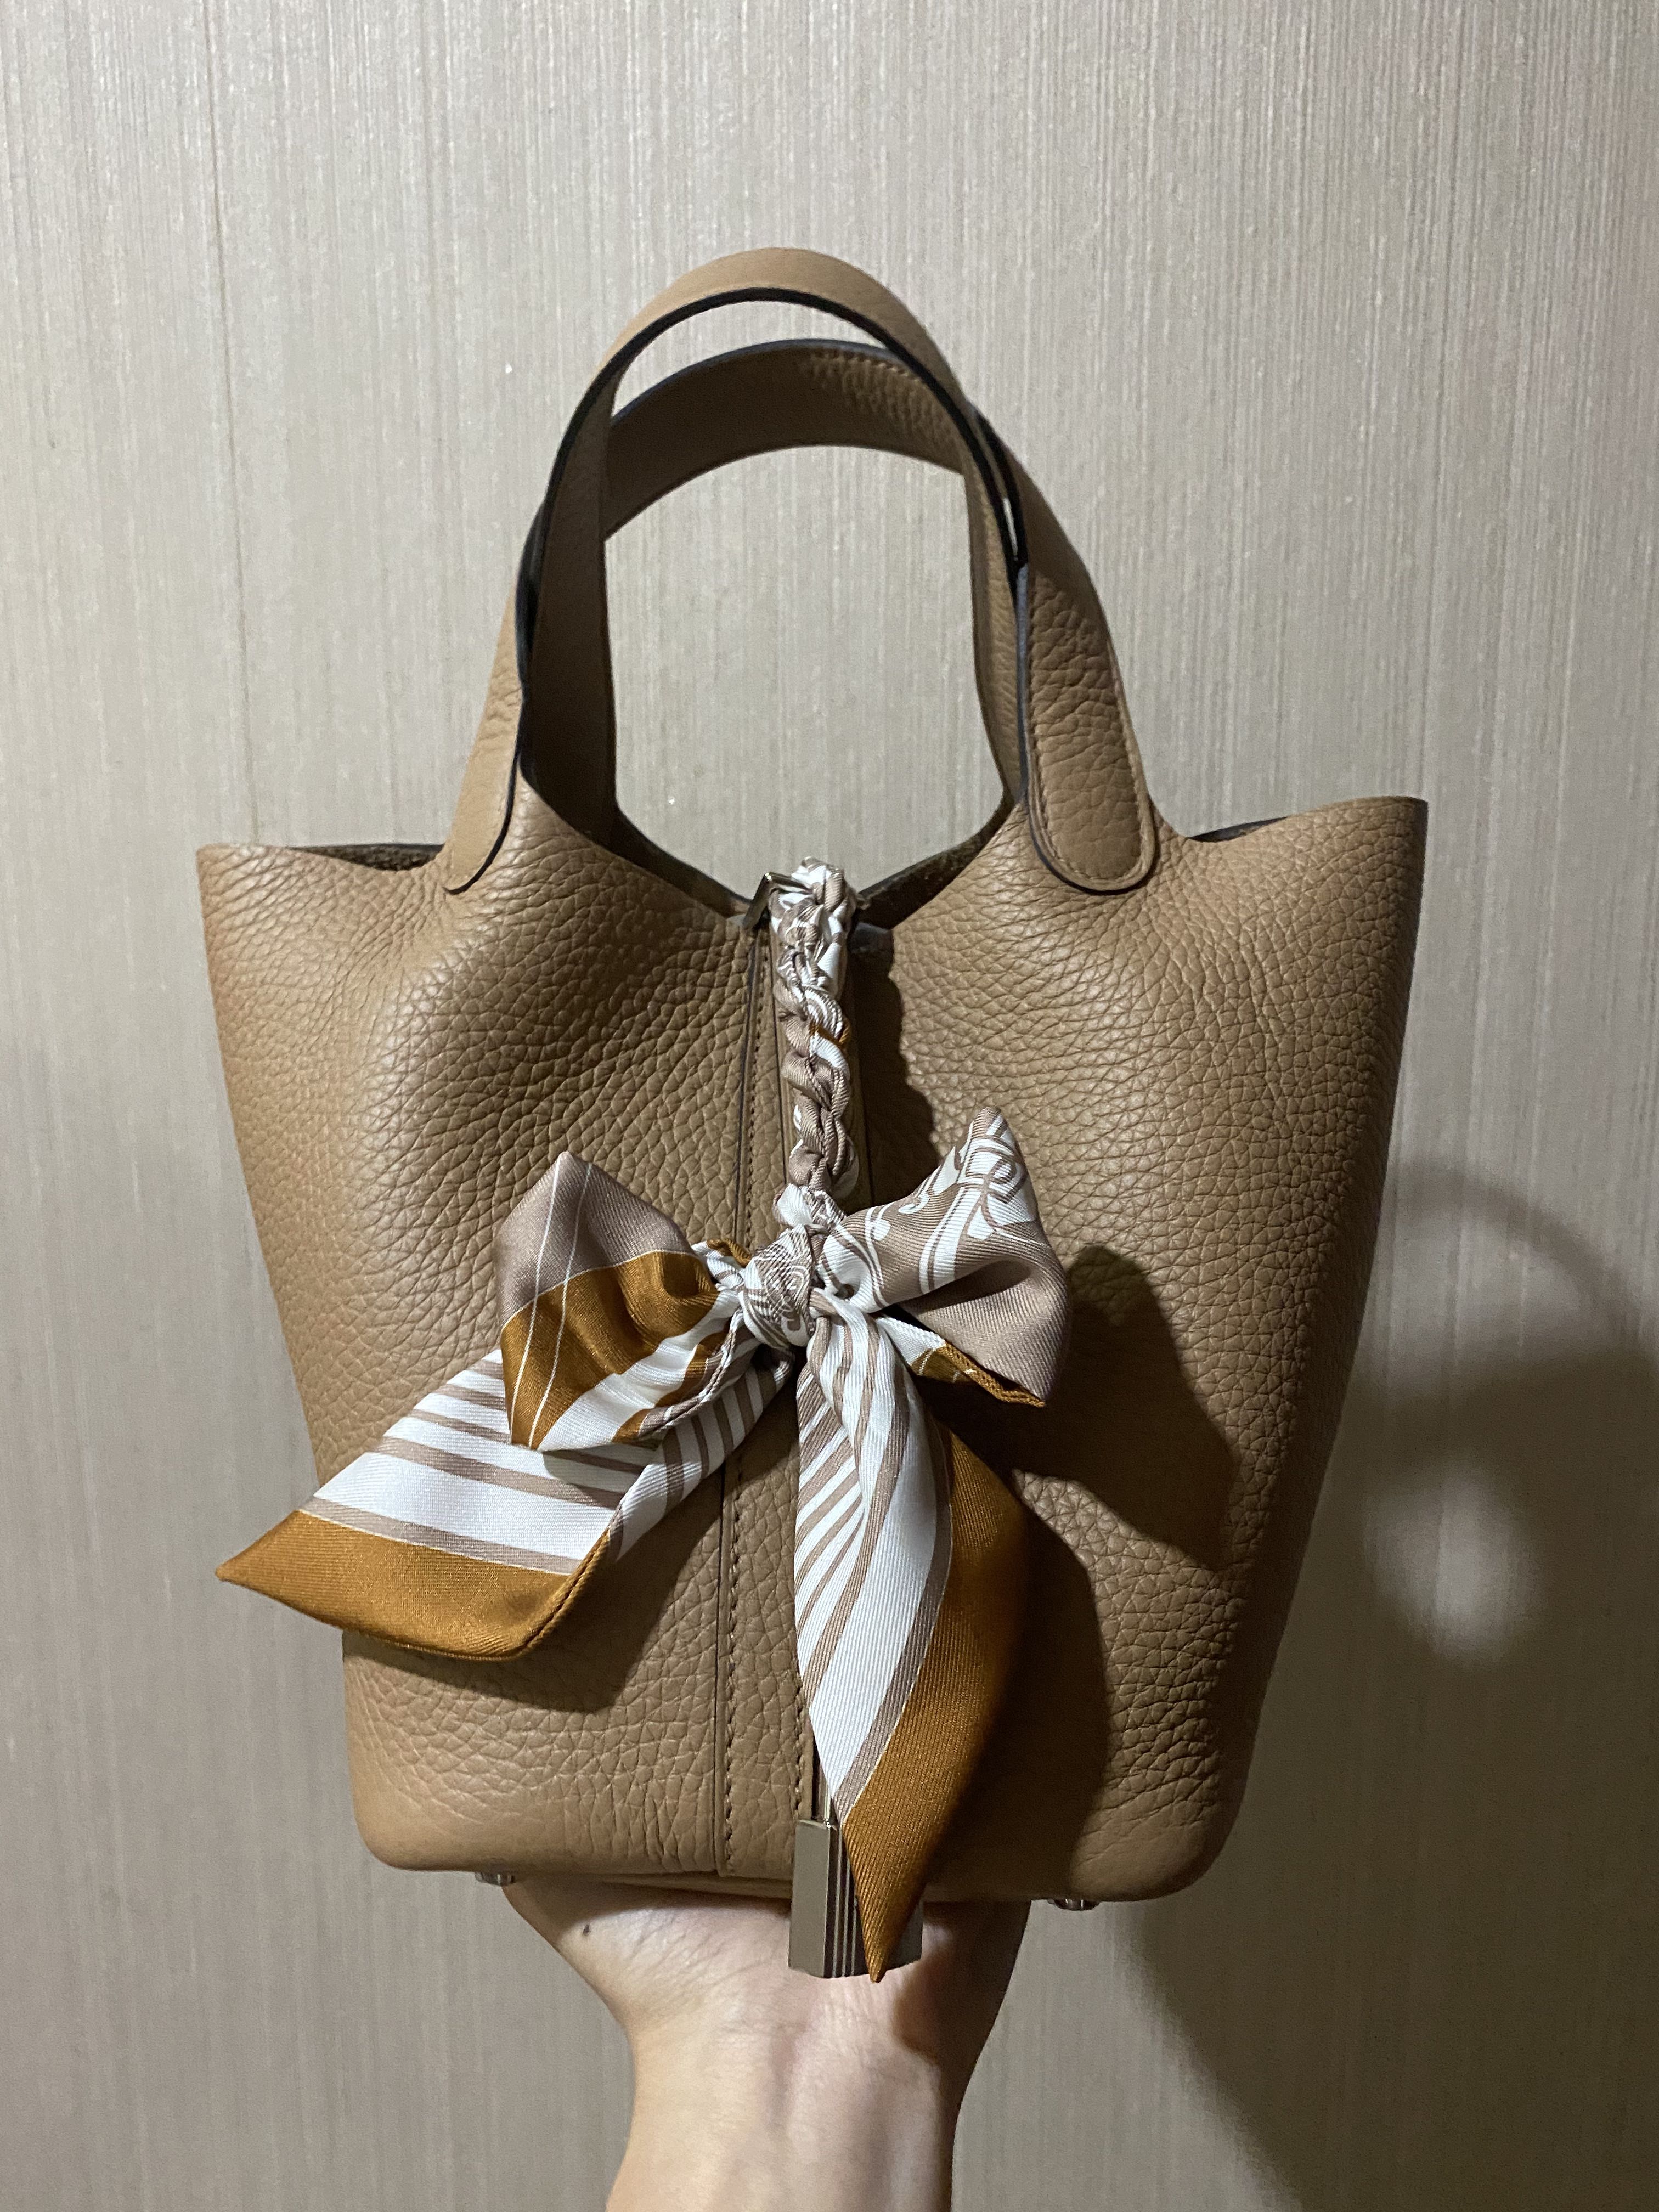 Hermes Picotin 18 in Chai Clemence Leather GHW